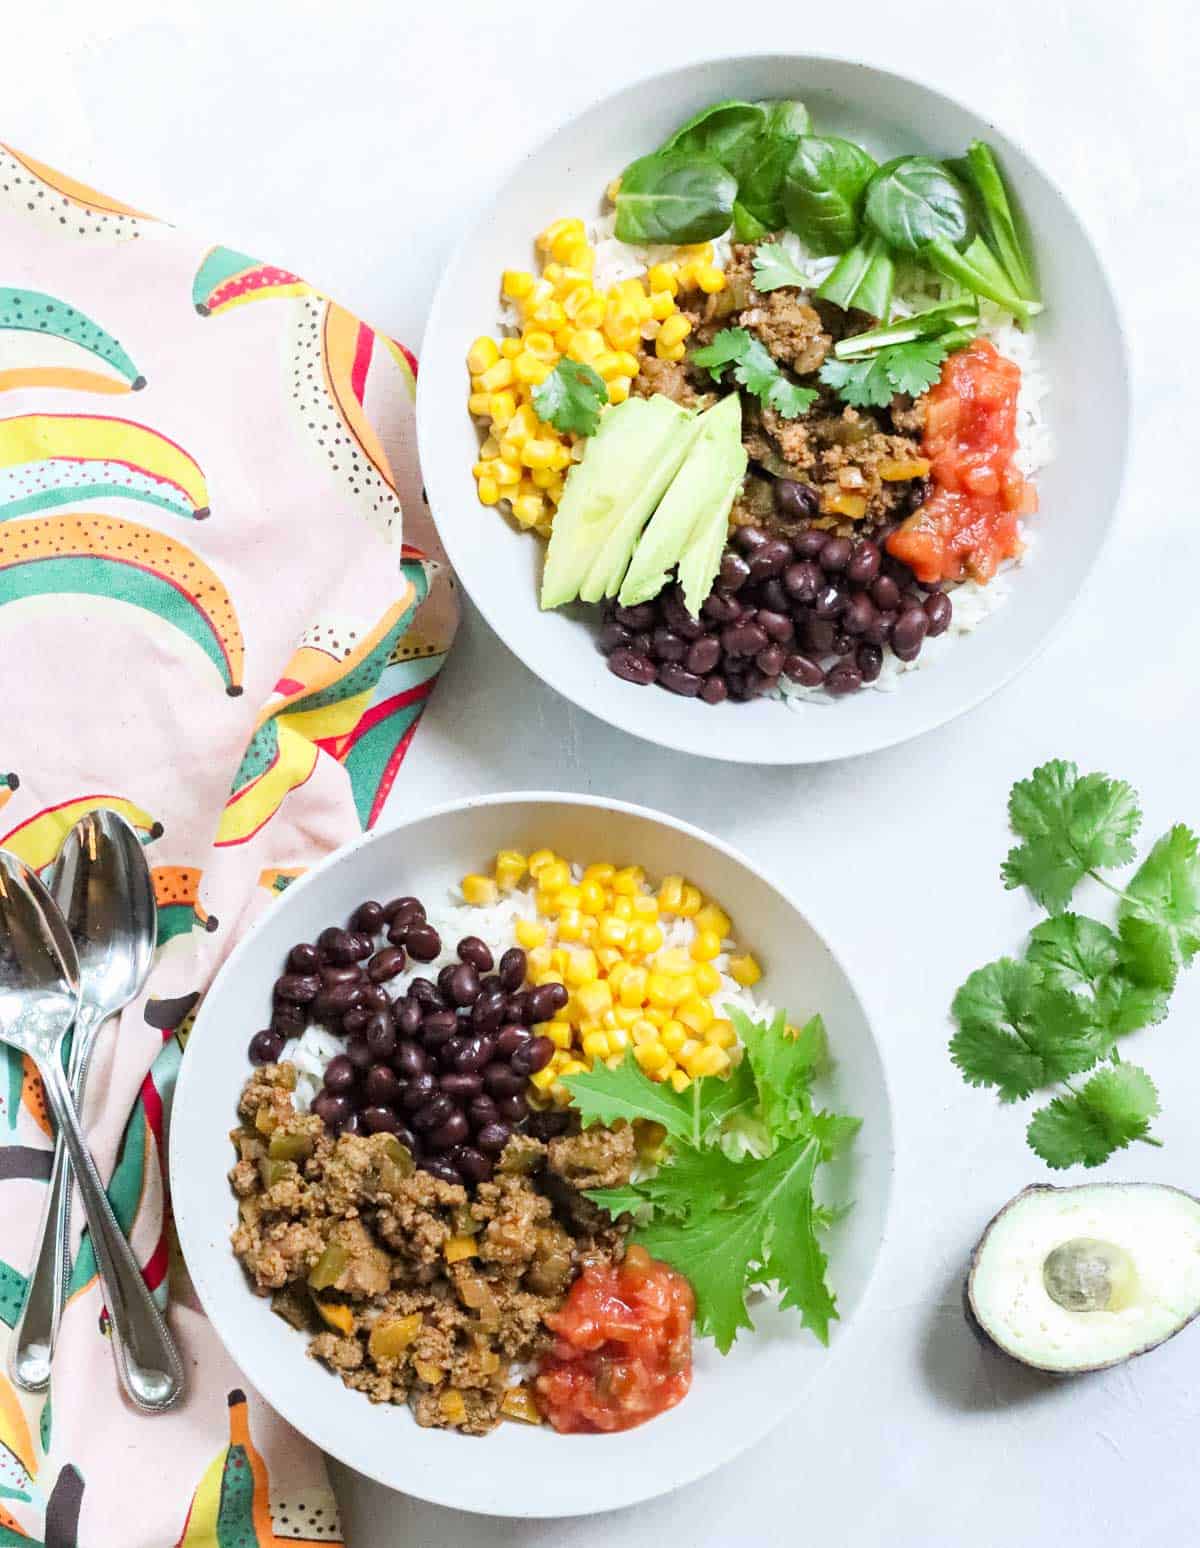 two bowls filled with rice, taco meat, salsa, lettuce, corn, and beans next to a banana patterned dish towel, avocado and cilantro with two silver spoons.